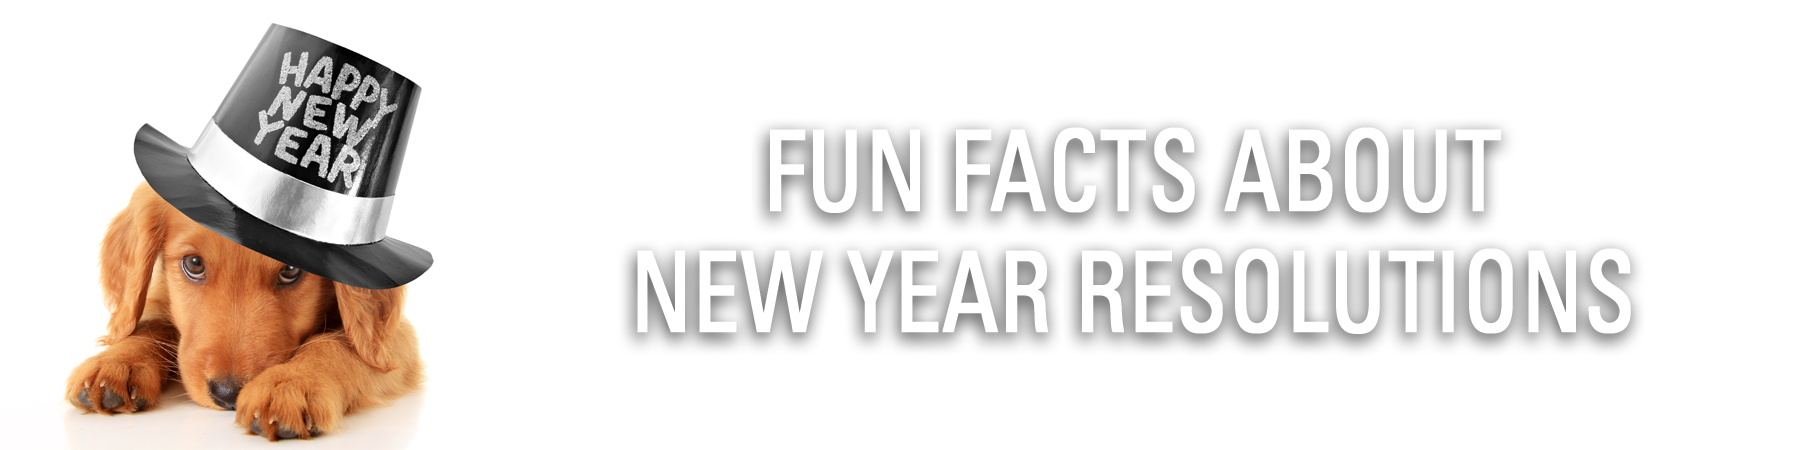 FUN FACTS ABOUT NEW YEAR RESOLUTIONS